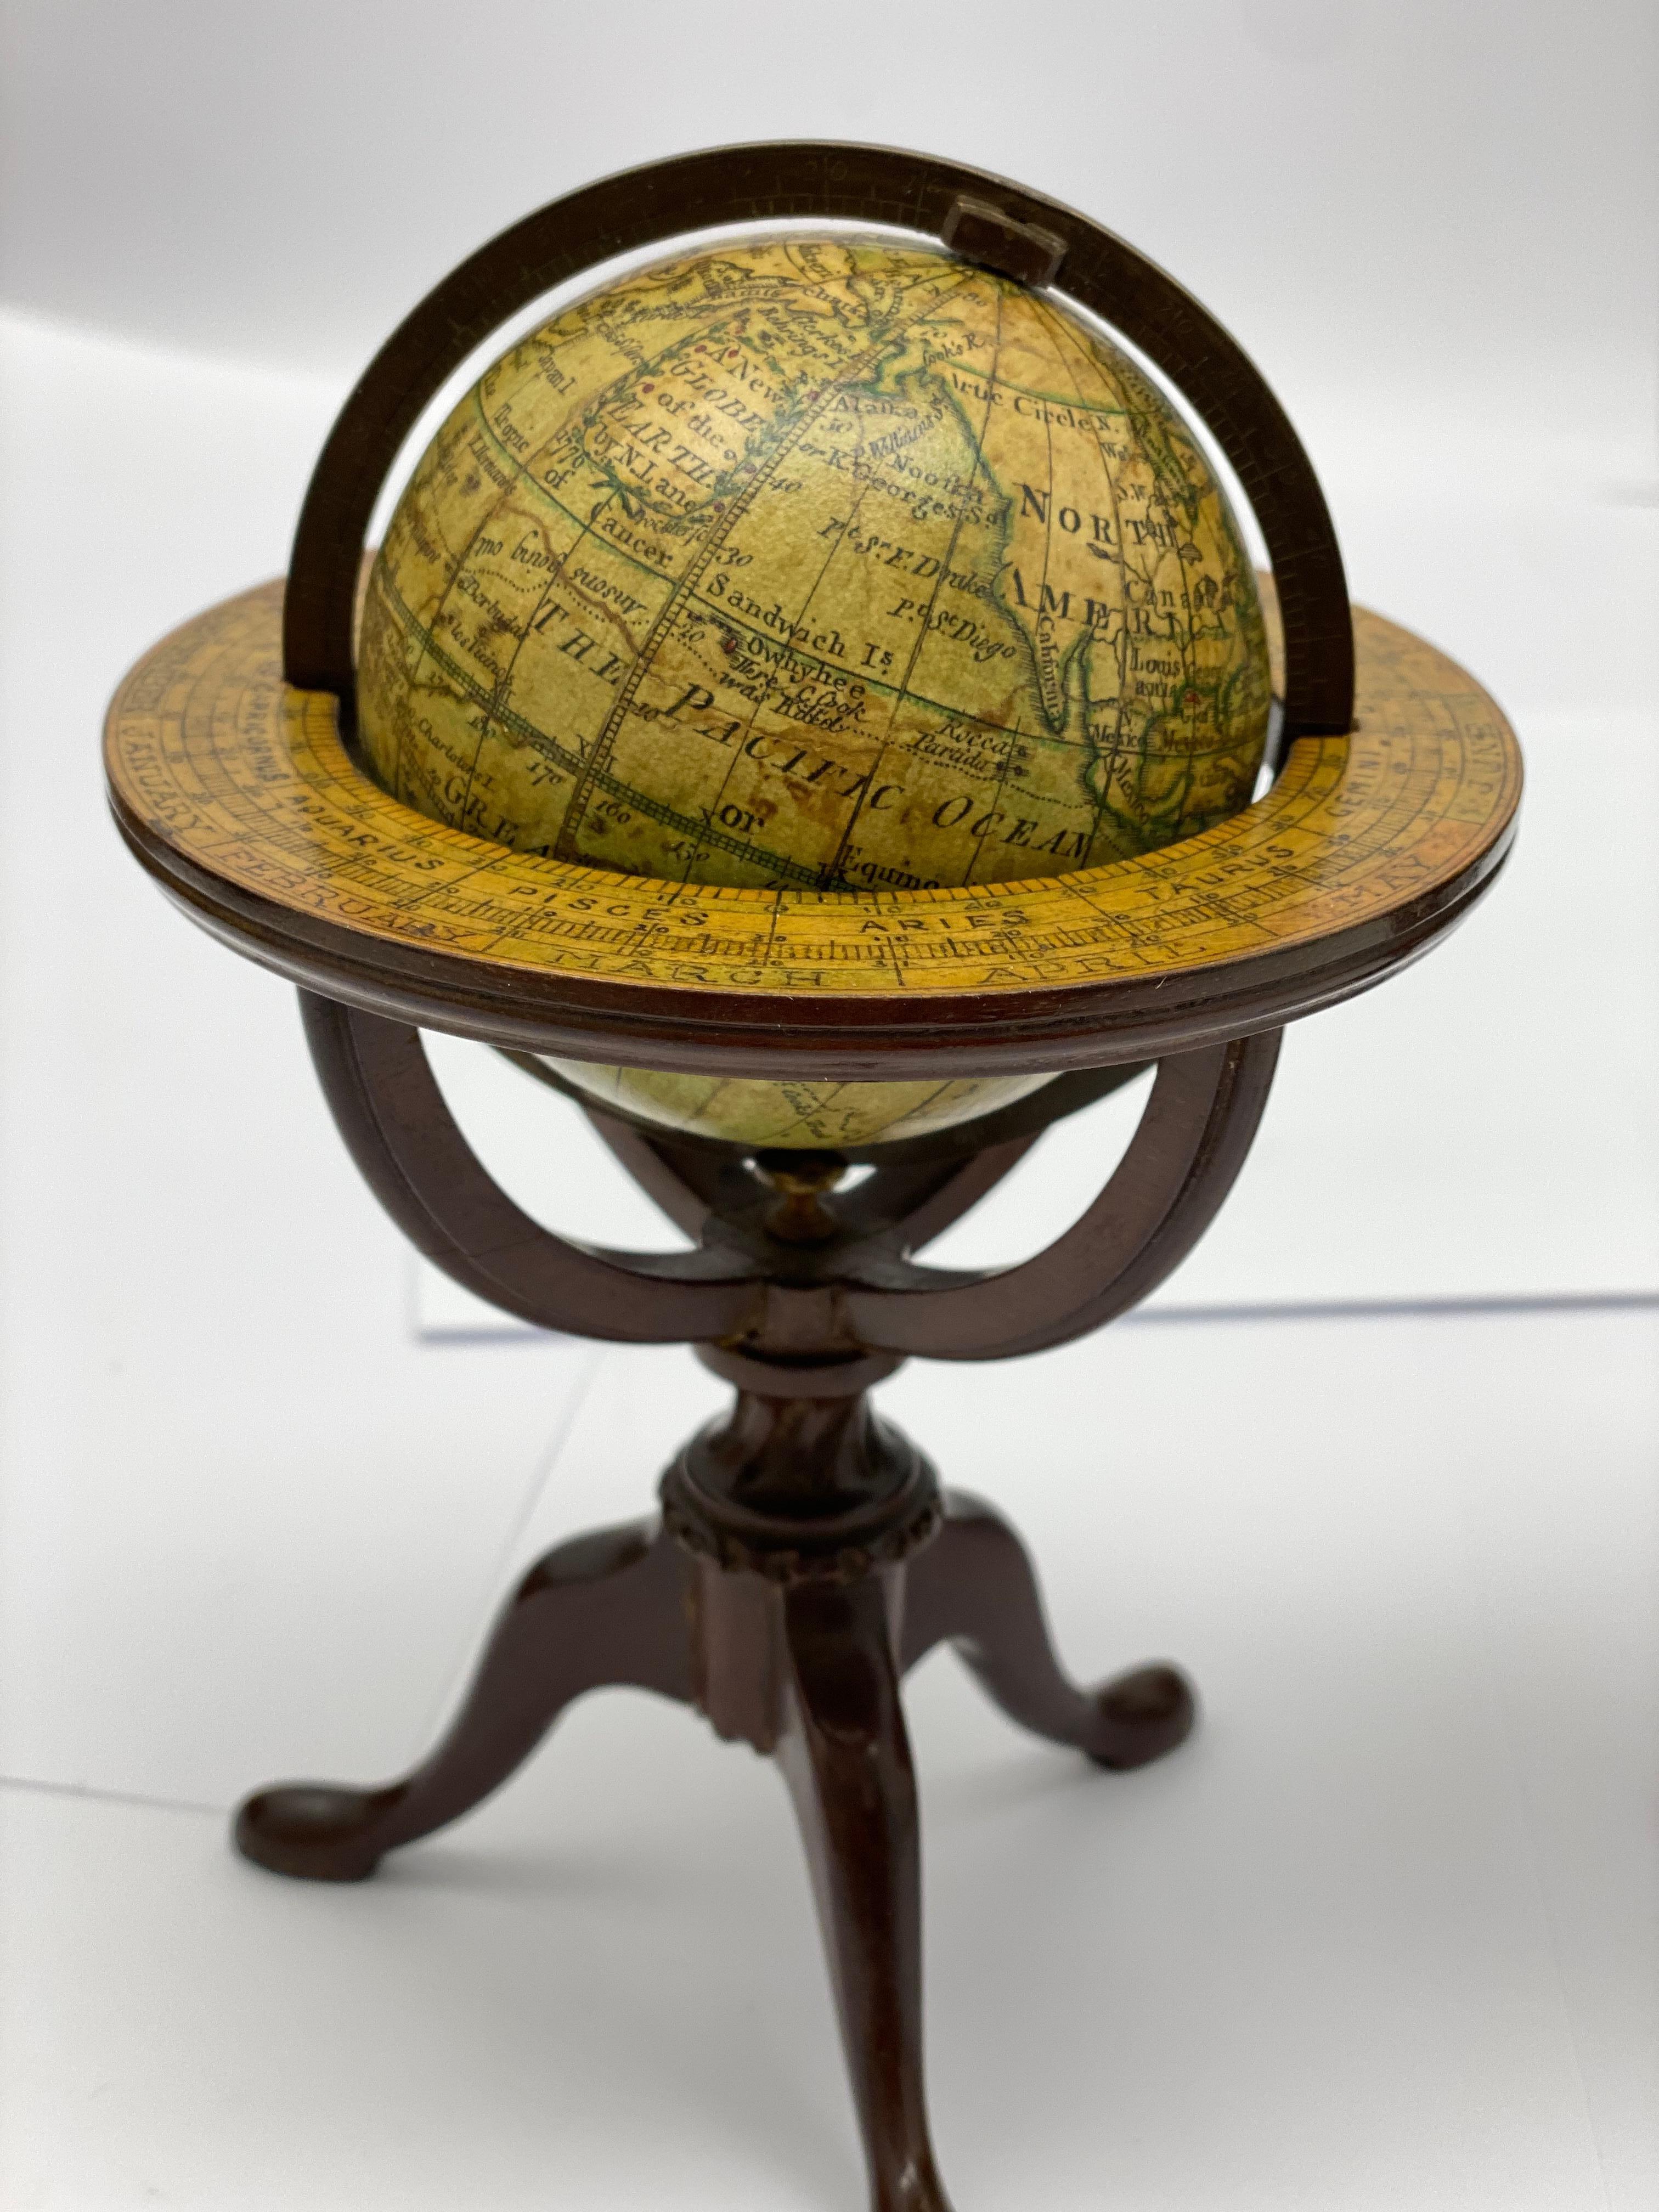 (GLOBES.) Nicholas Lane. A New Globe of the Earth [and] [Untitled Celestial Globe]. Pair of 2 3/4-inch miniature desk globes, each comprised of 12 hand-colored engraved gores on plaster spheres mounted to nineteenth-century calibrated brass meridian